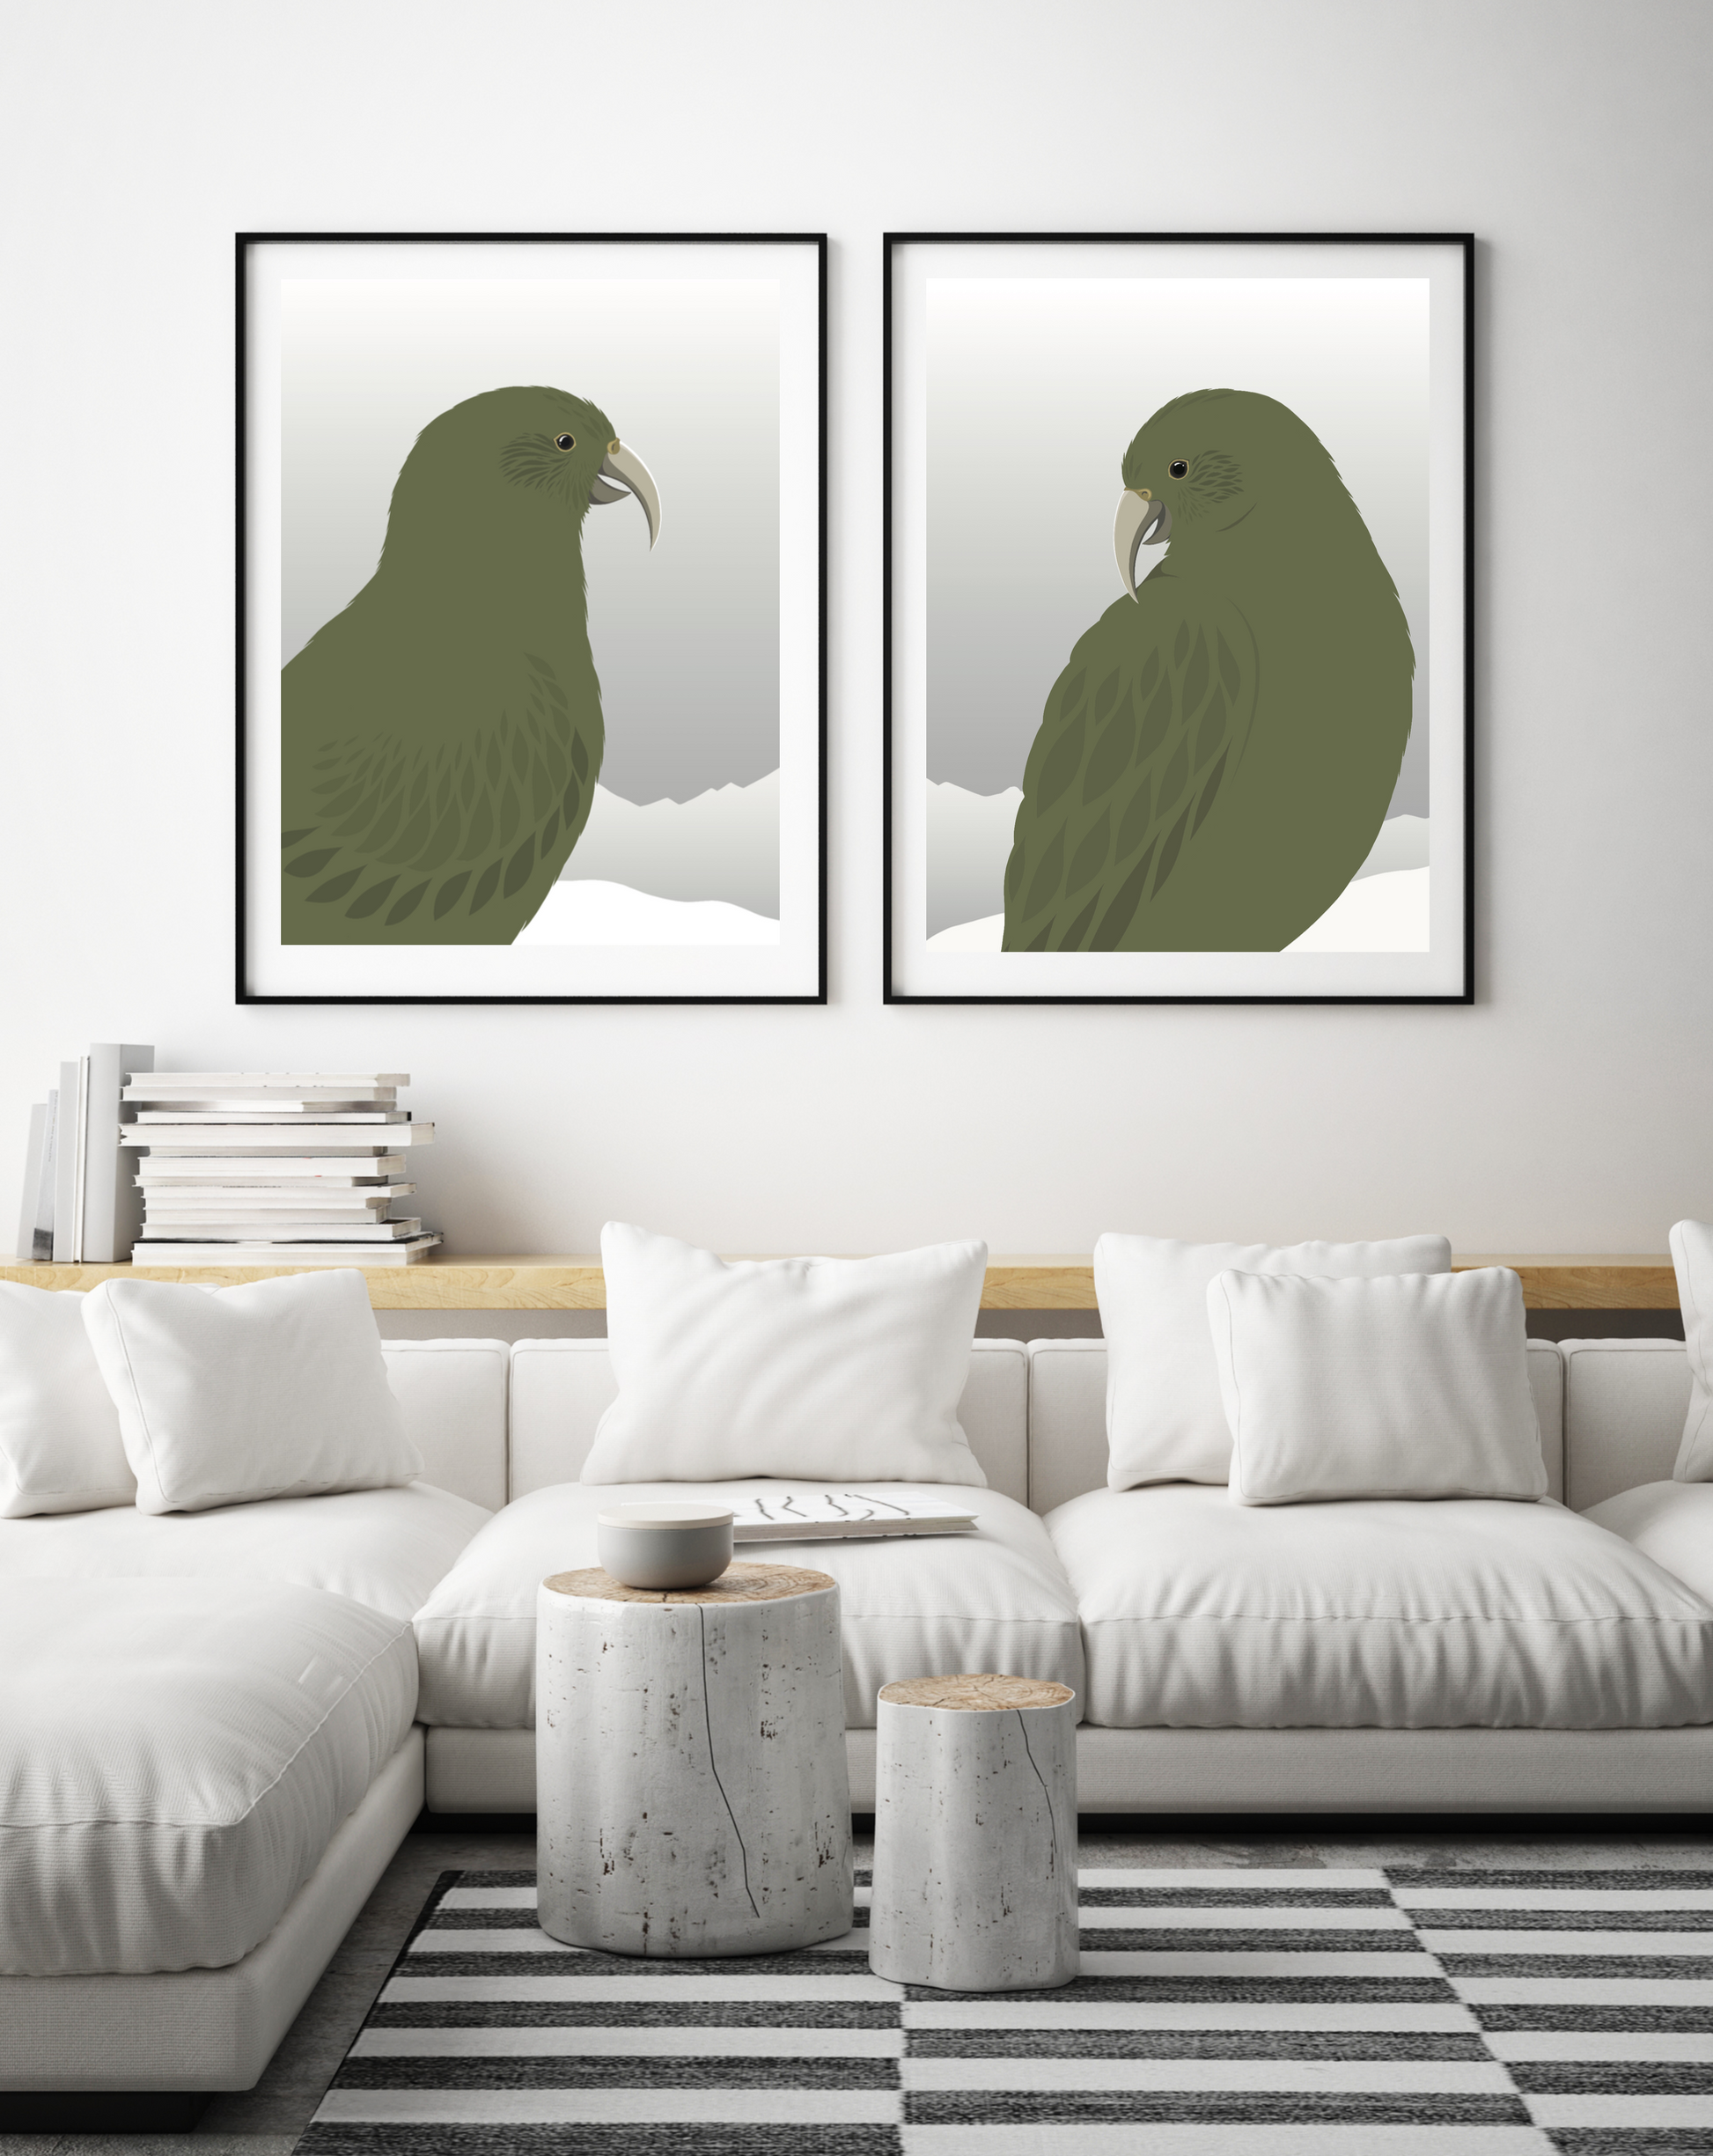 Framed art prints of the Kea bird of New Zealand, by Hansby Design 